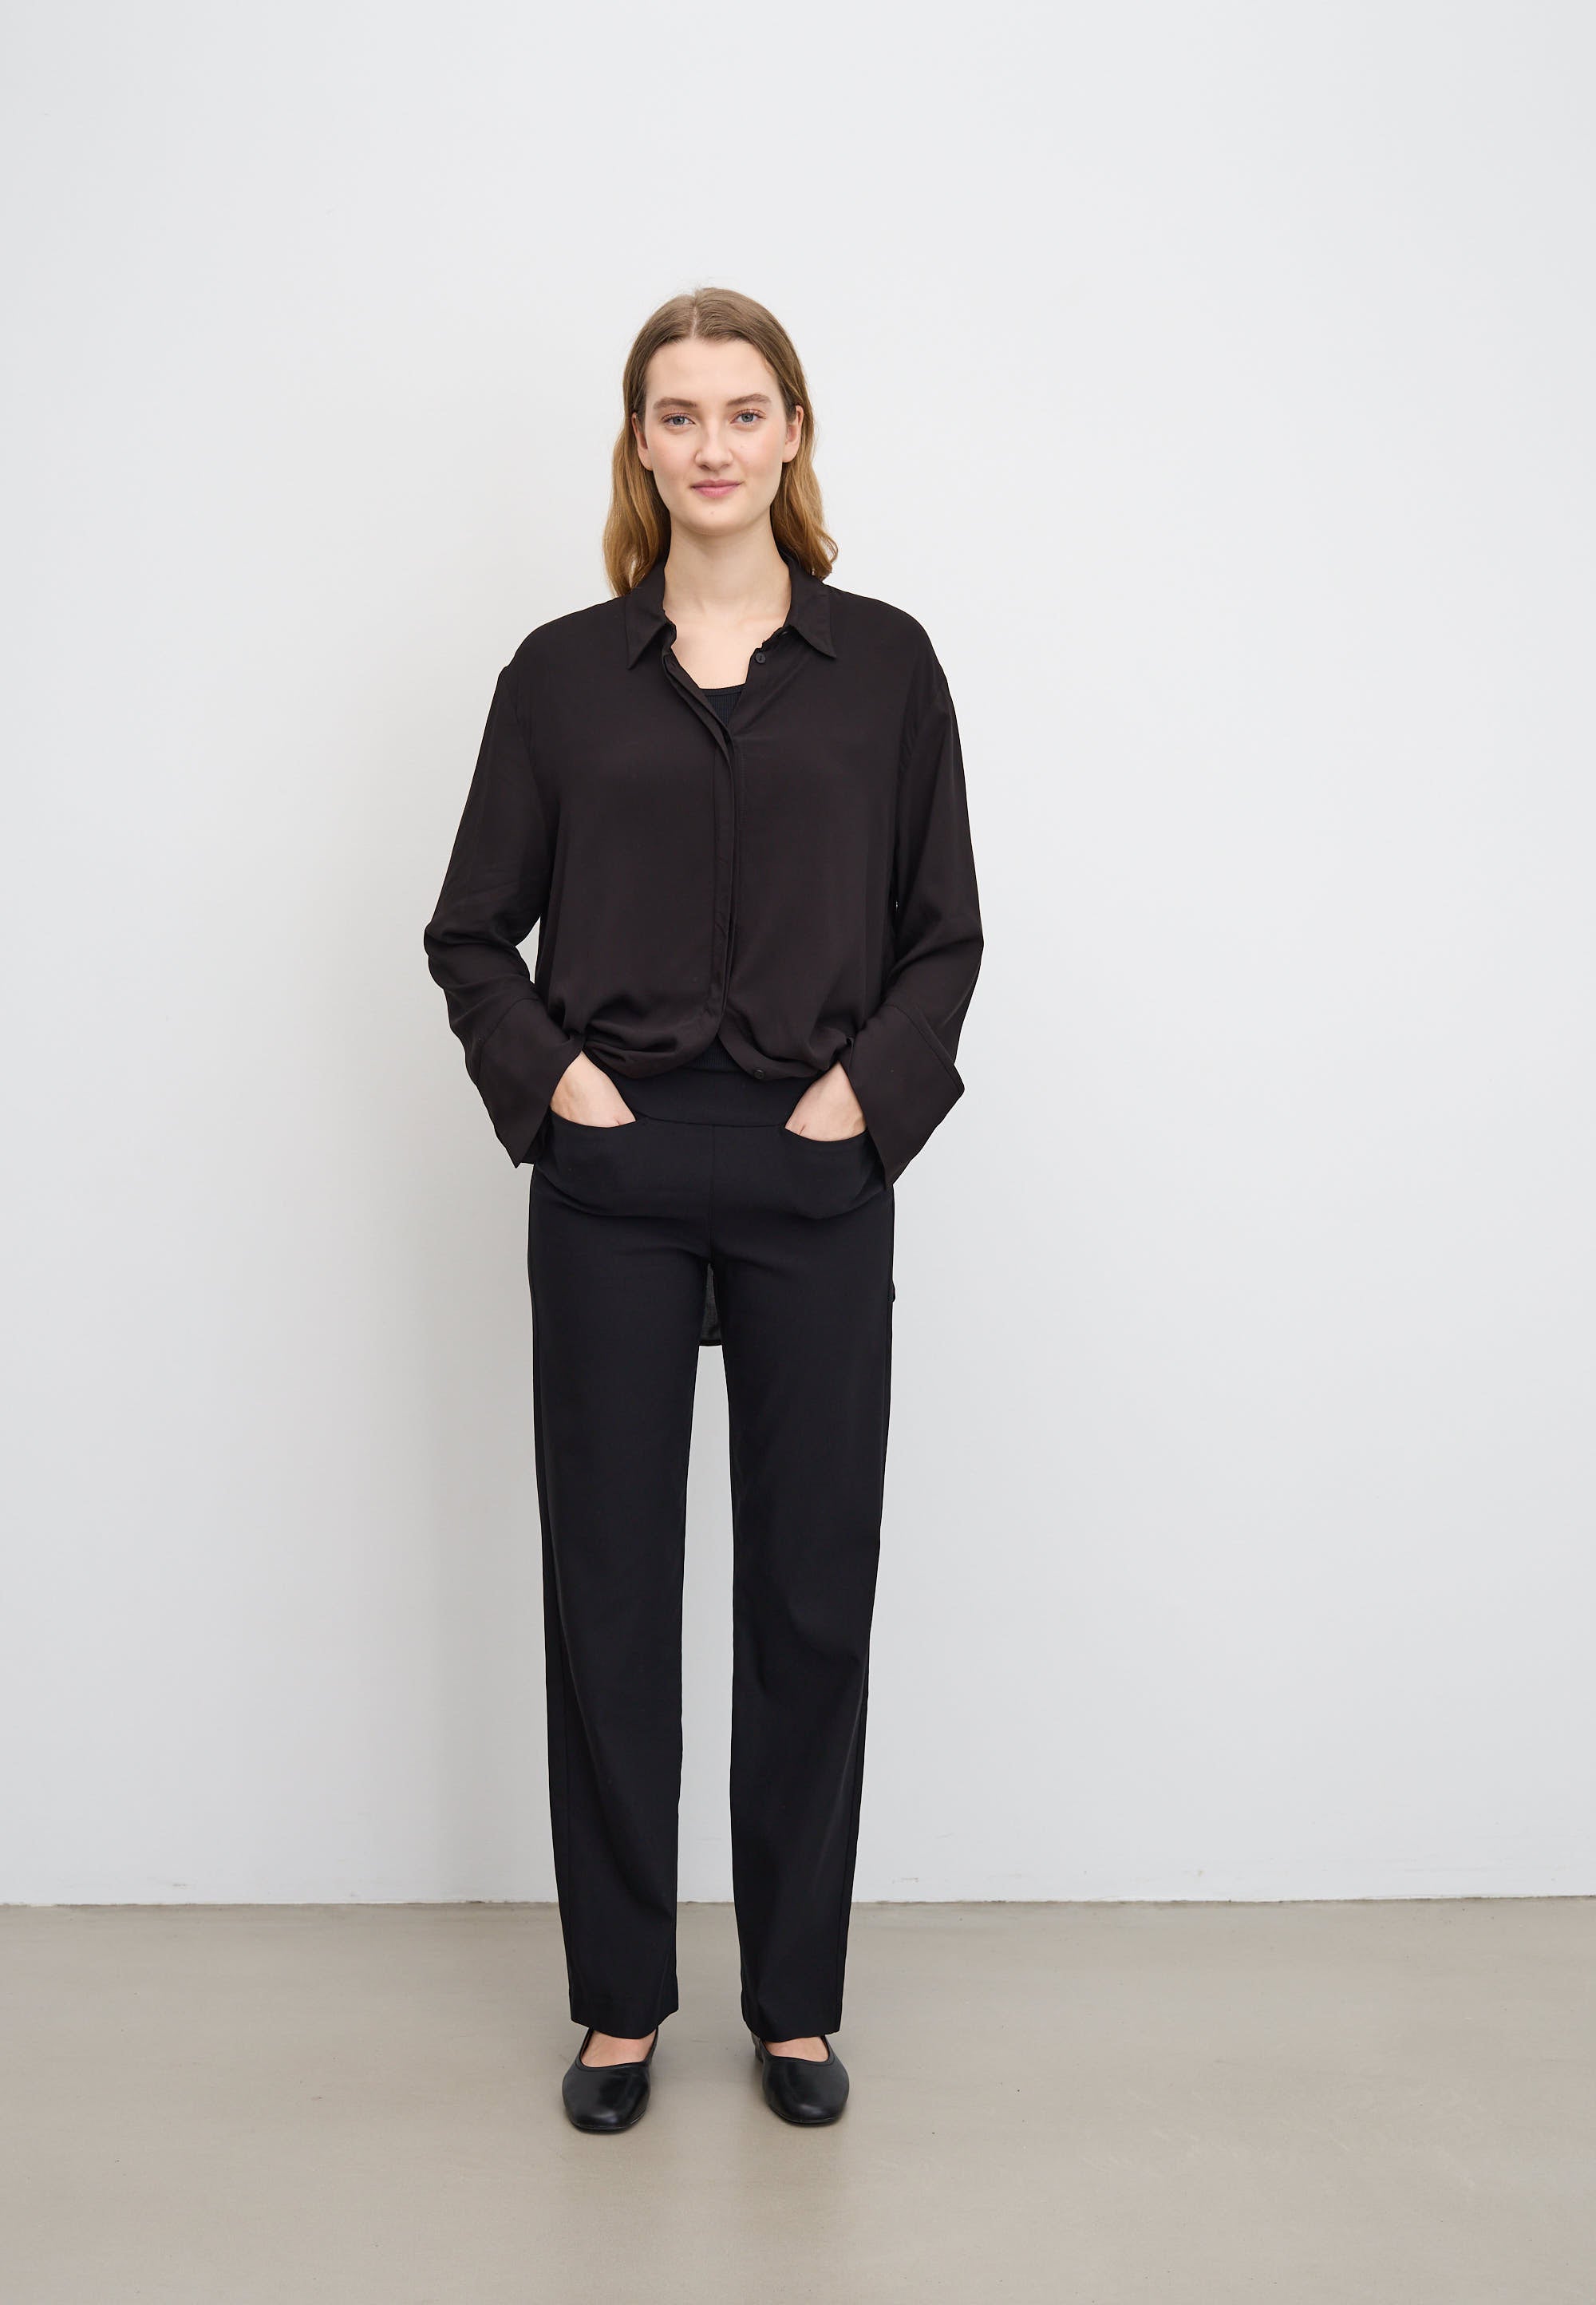 LAURIE Thea Straight - Medium Length Trousers STRAIGHT 99000 Black